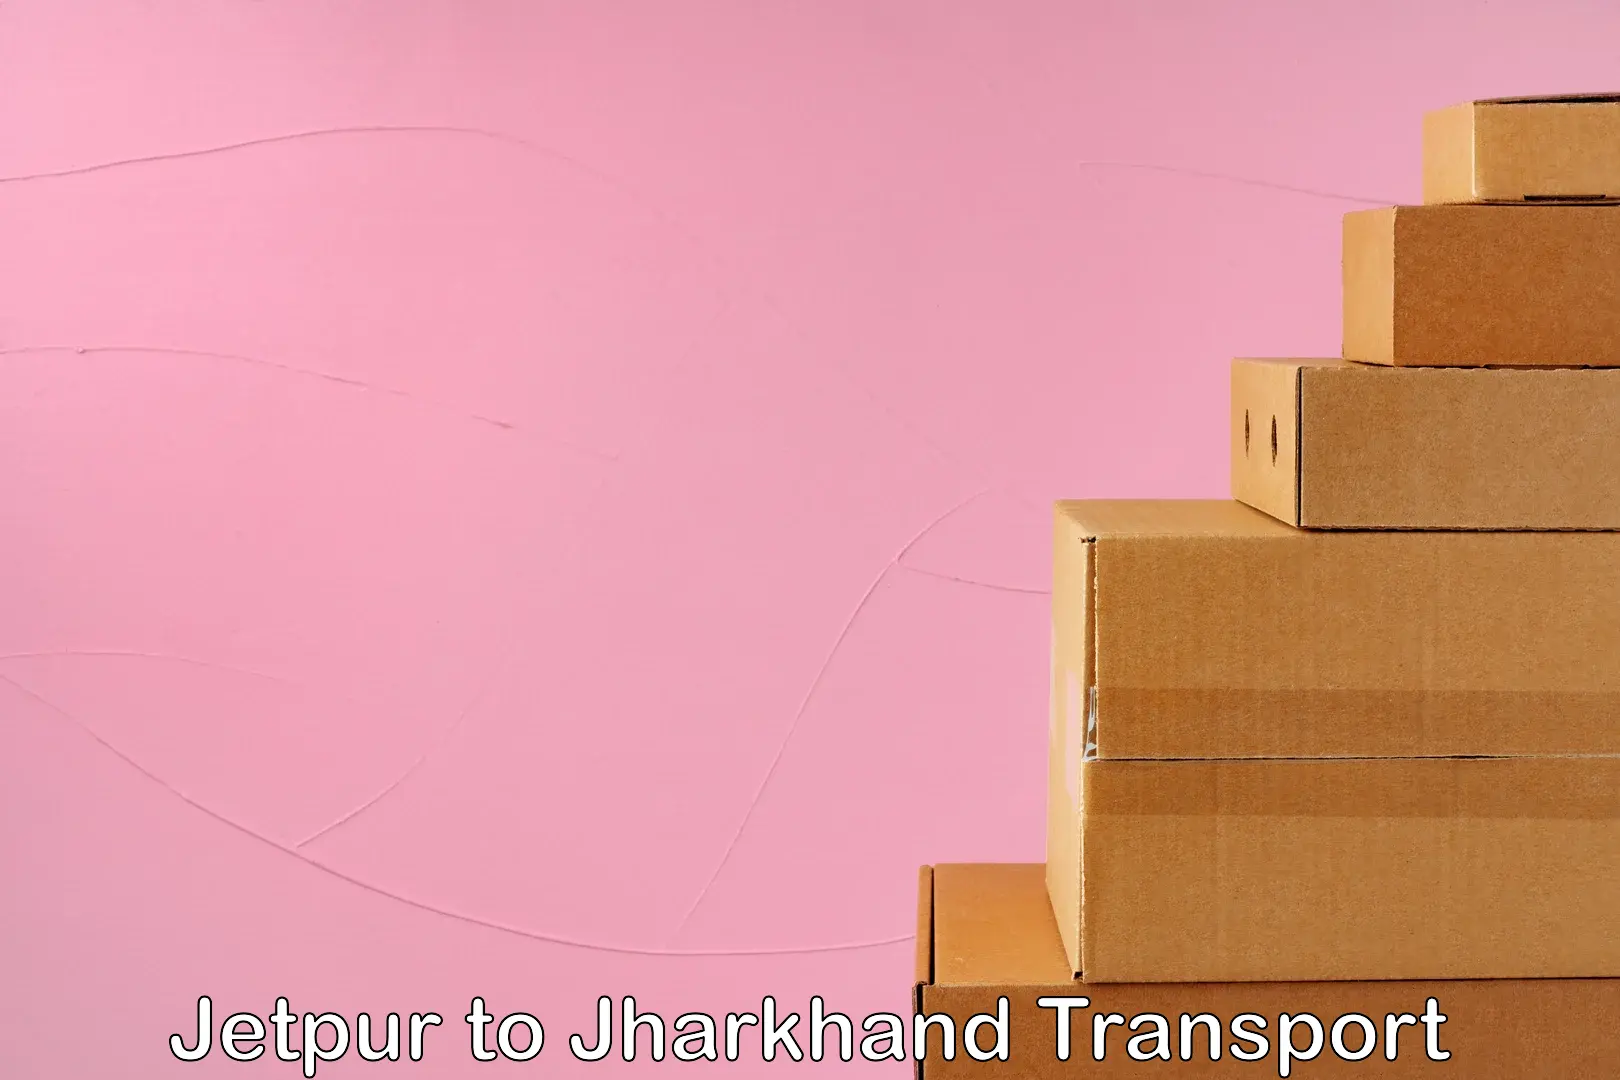 Express transport services Jetpur to Jharkhand